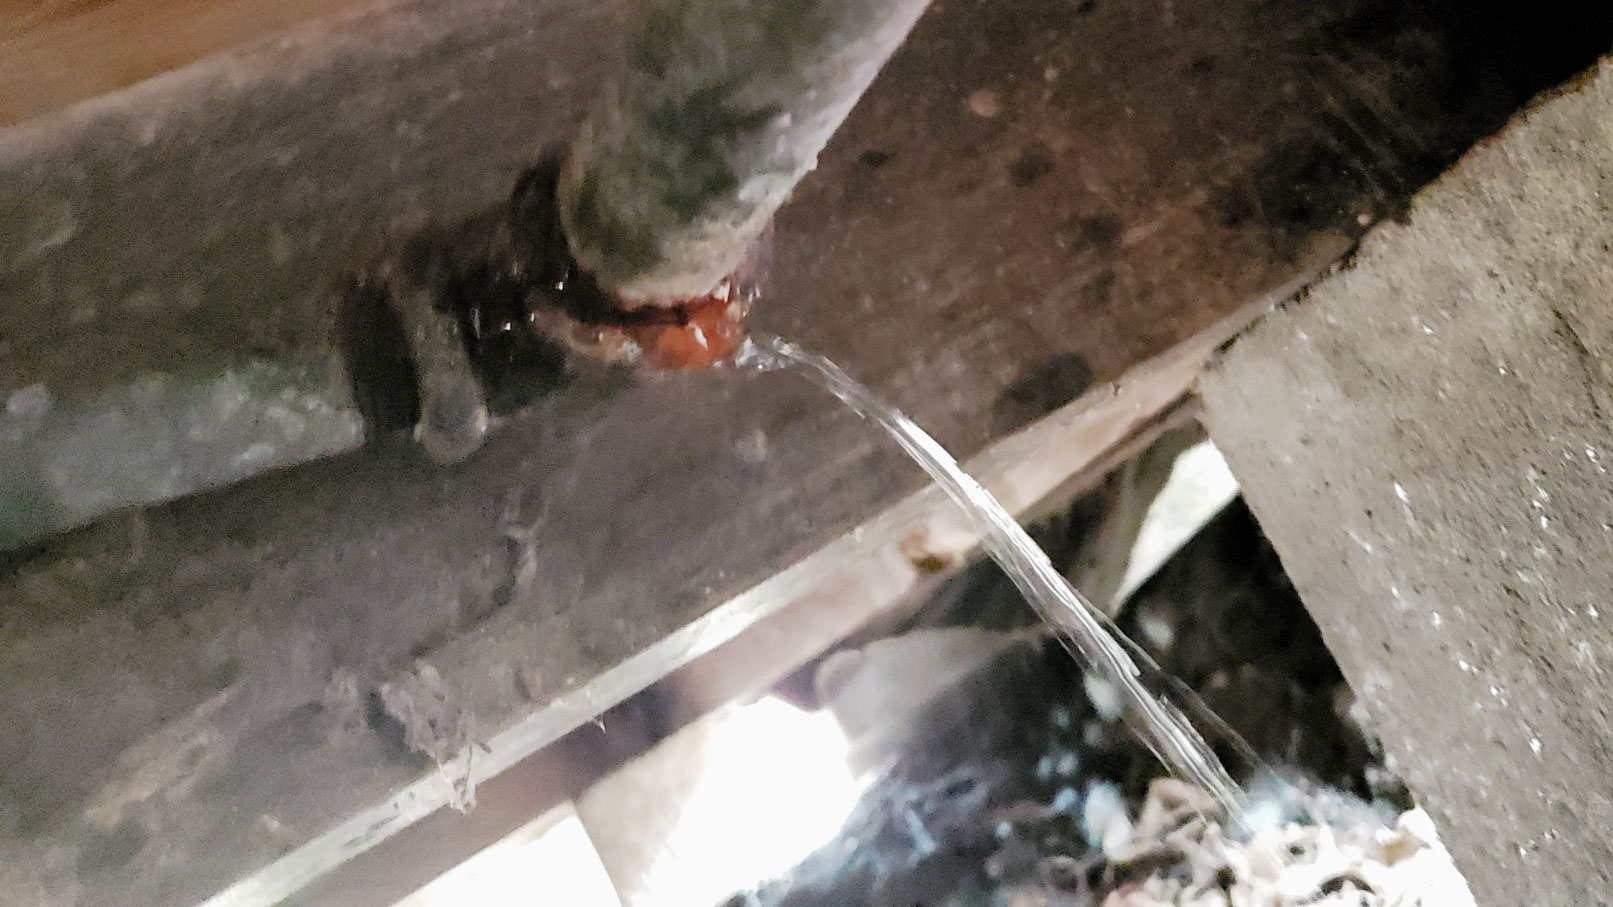 PHOTO: Image shows a rusted pipe with water leaking out due to the pipe bursting. Photo by Stephanie Tanner.